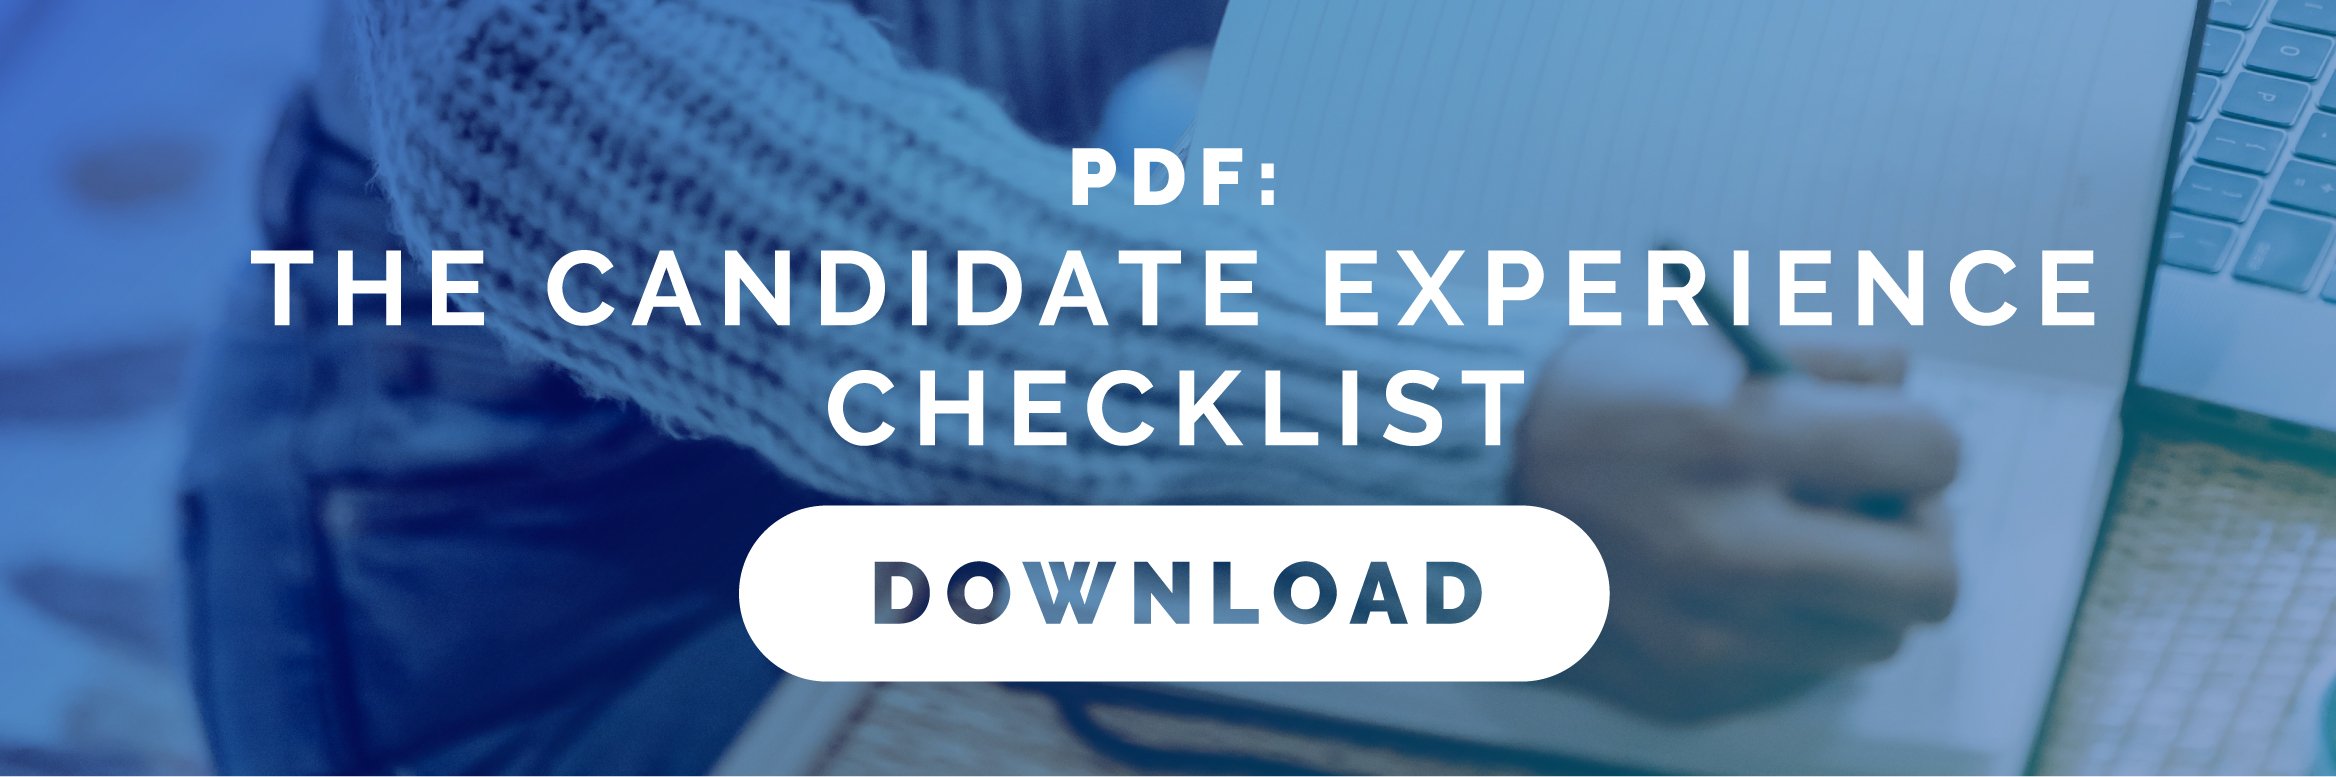 Candidate experience checklist